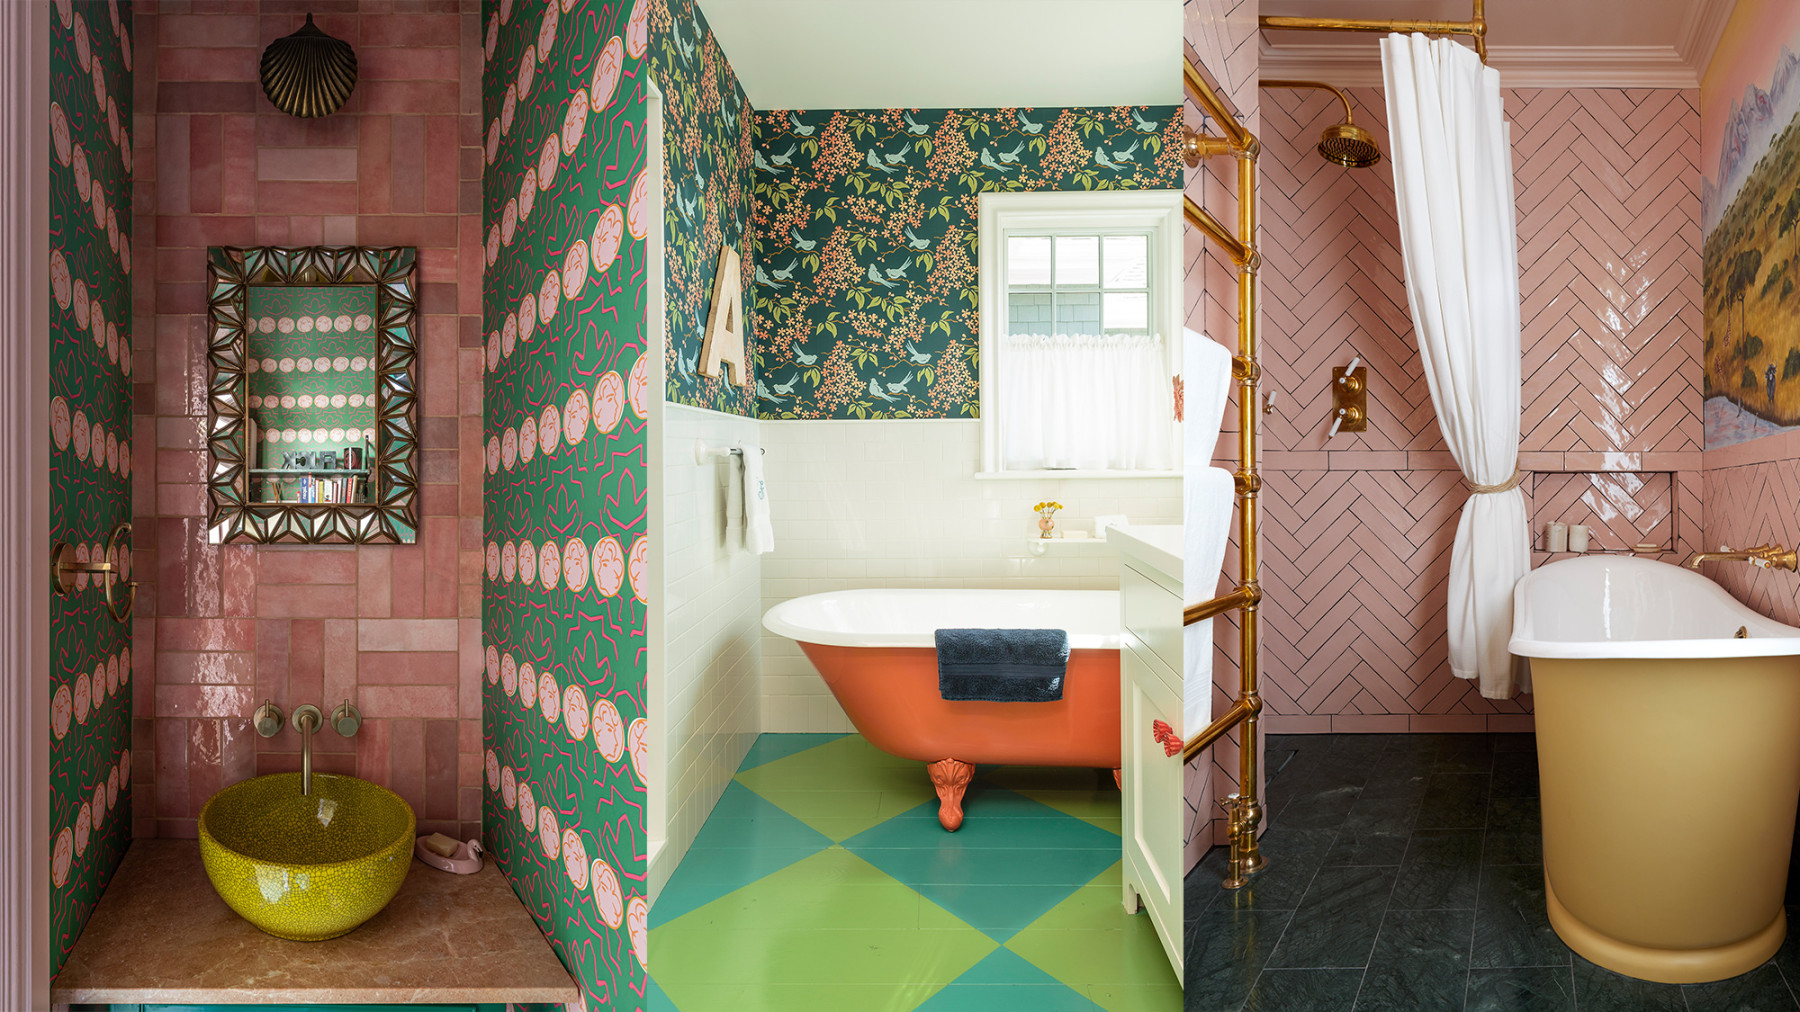 Colorful bathroom ideas:  bold and playful schemes